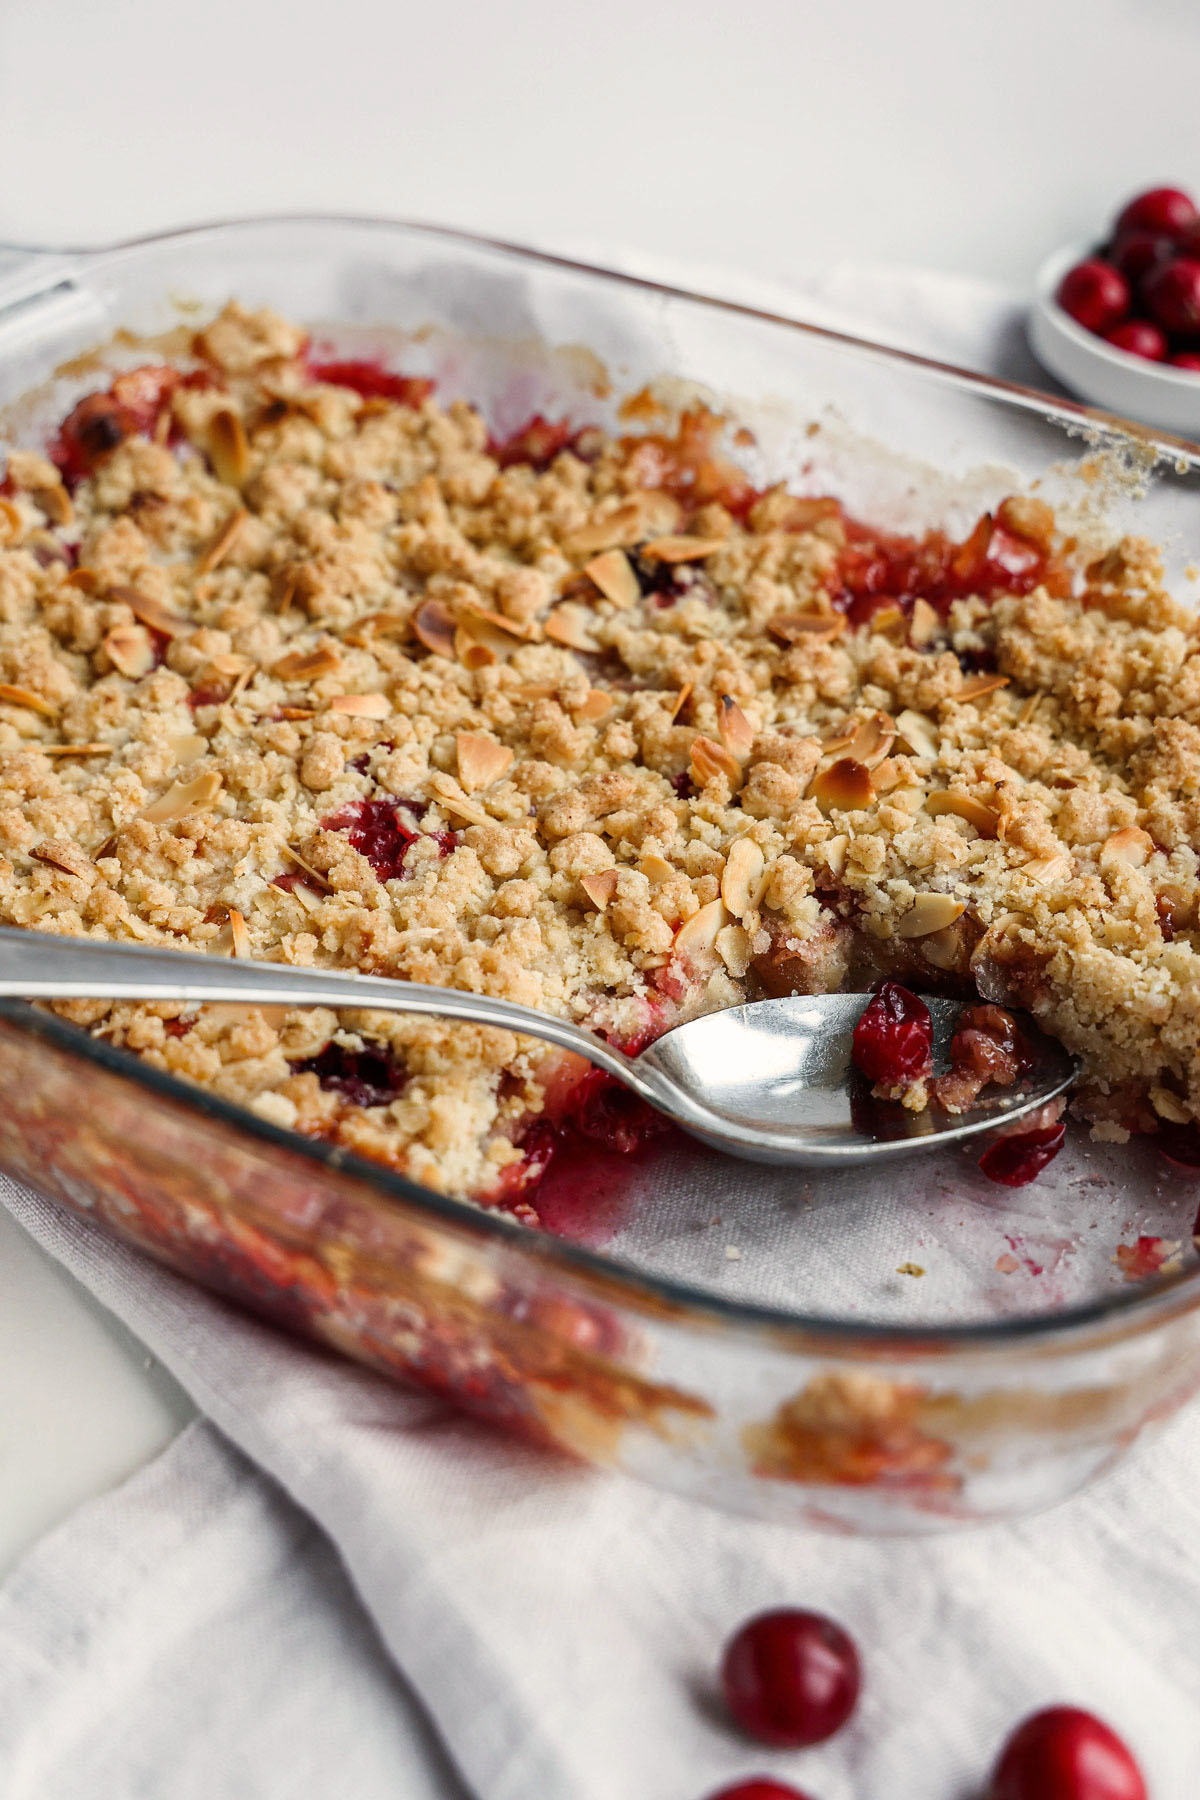 Apple crumble with cranberries.